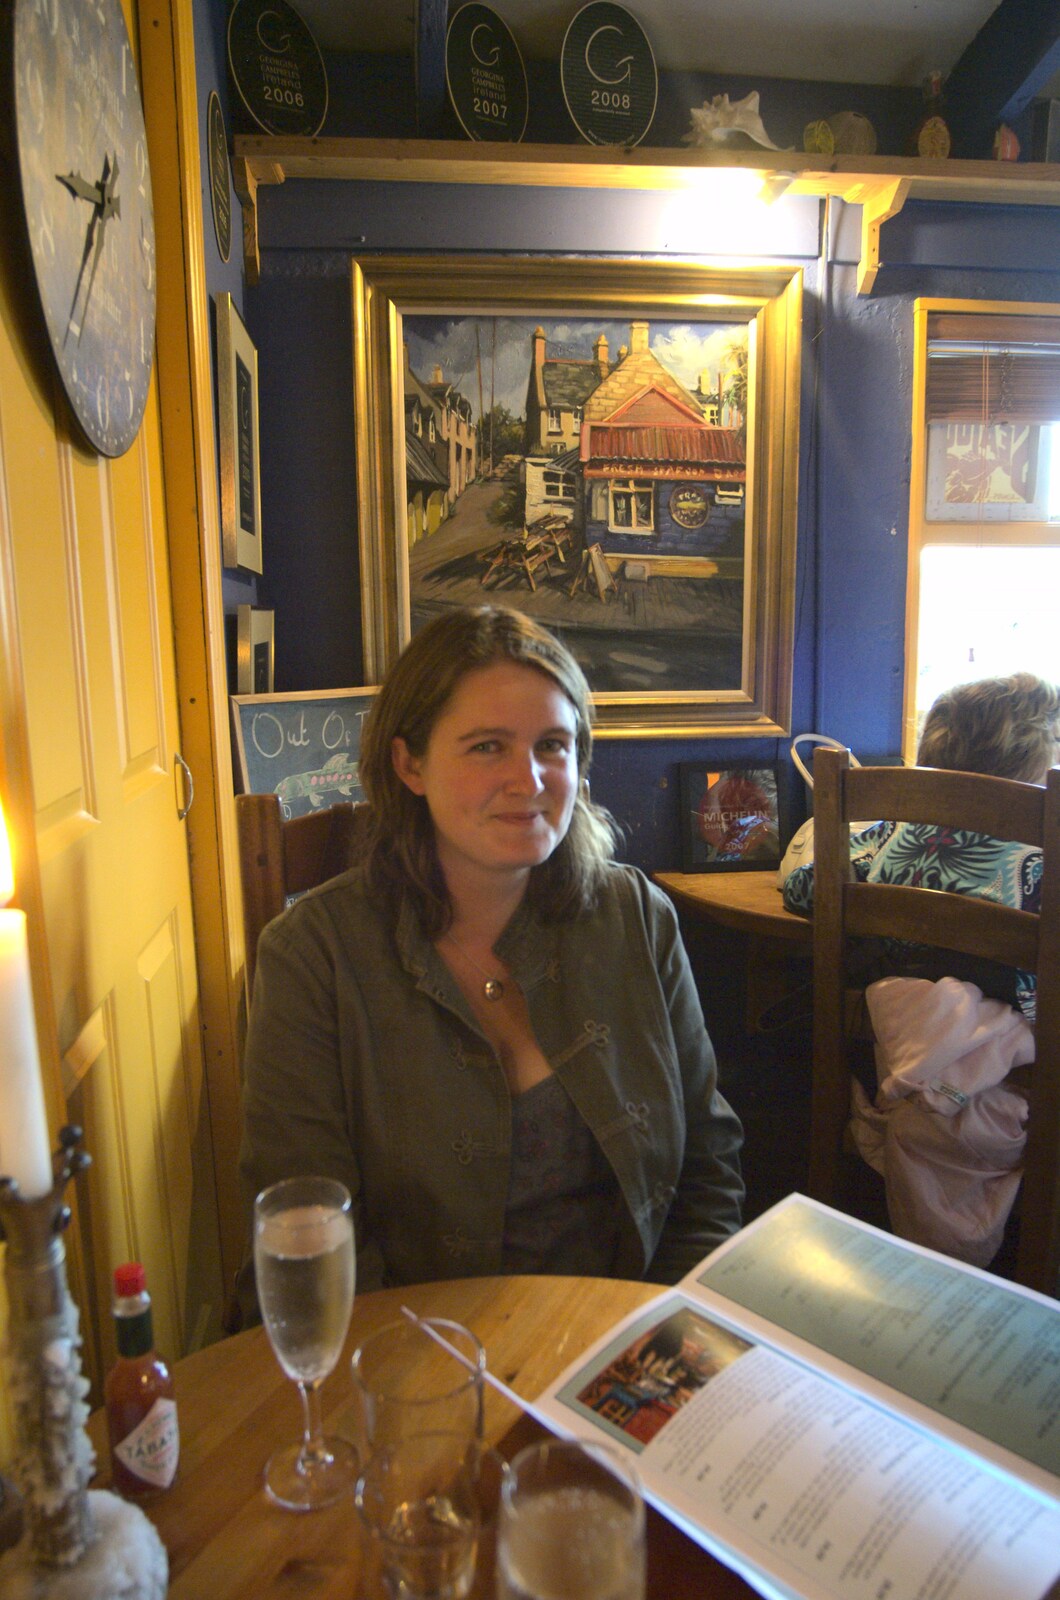 Isobel in 'Out of the Blue' restaurant from A Trip to Dingle, County Kerry, Ireland - 21st July 2009